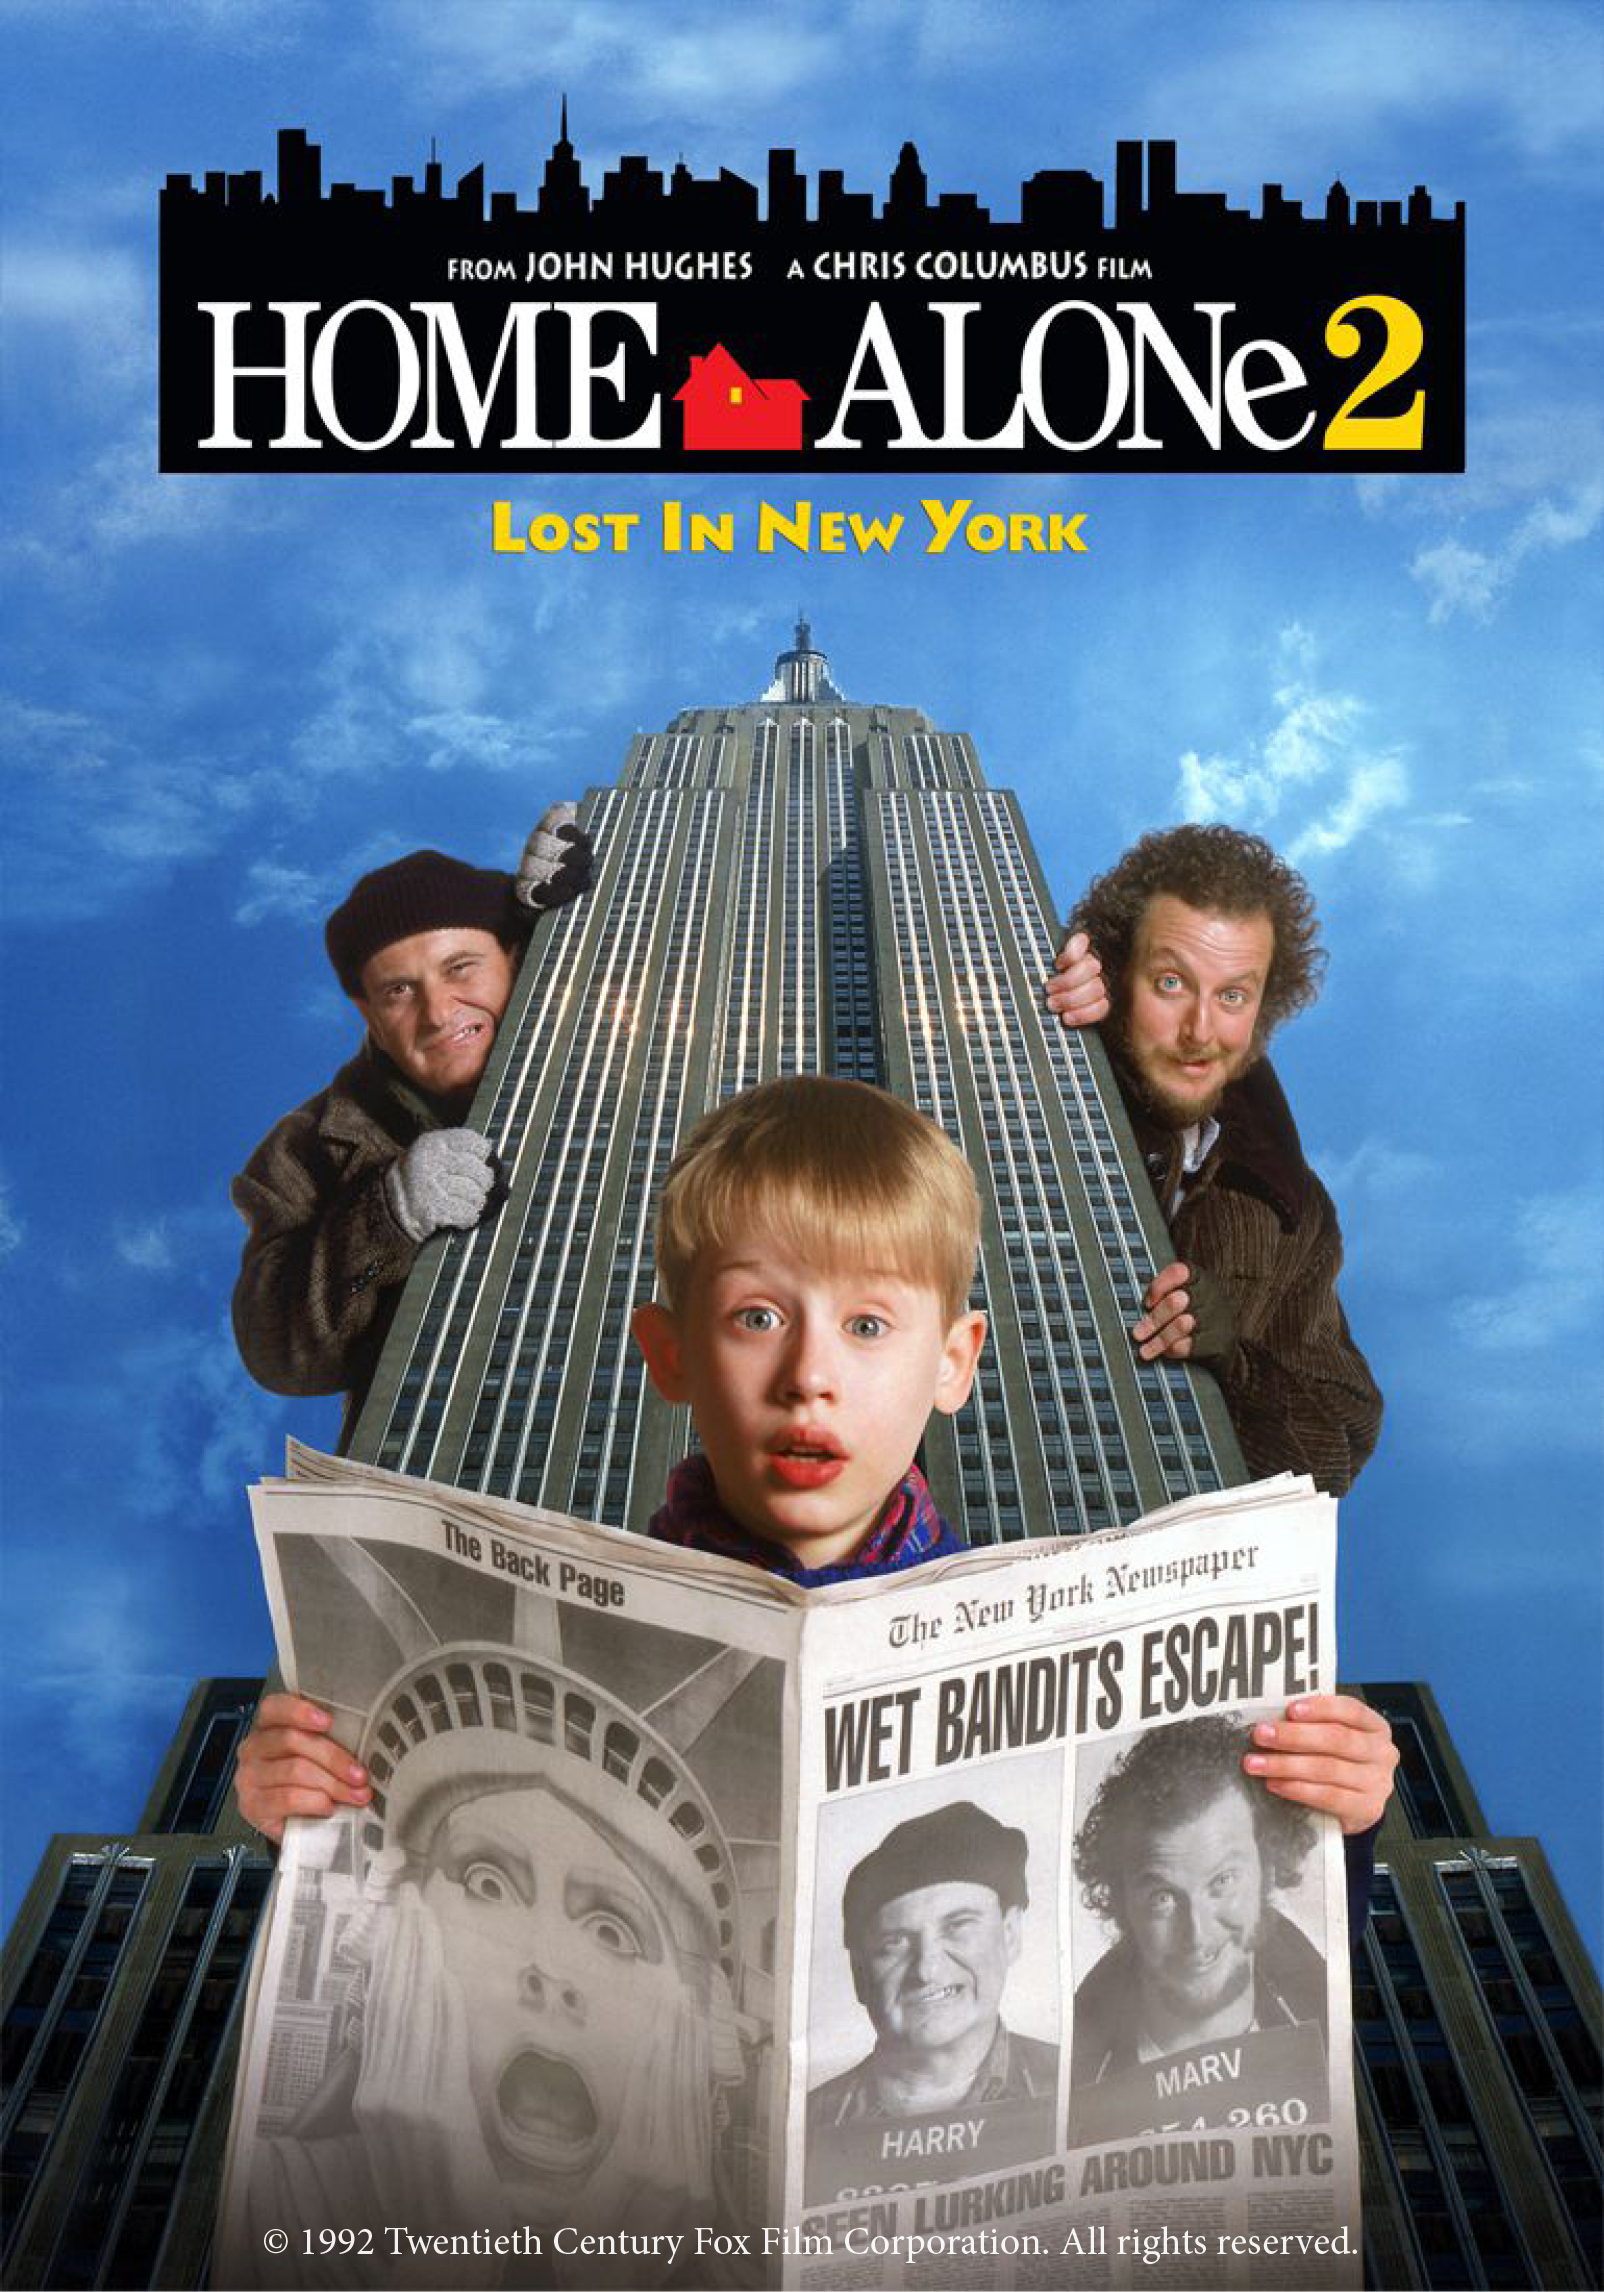 Home Alone 2 Lost in New York poster